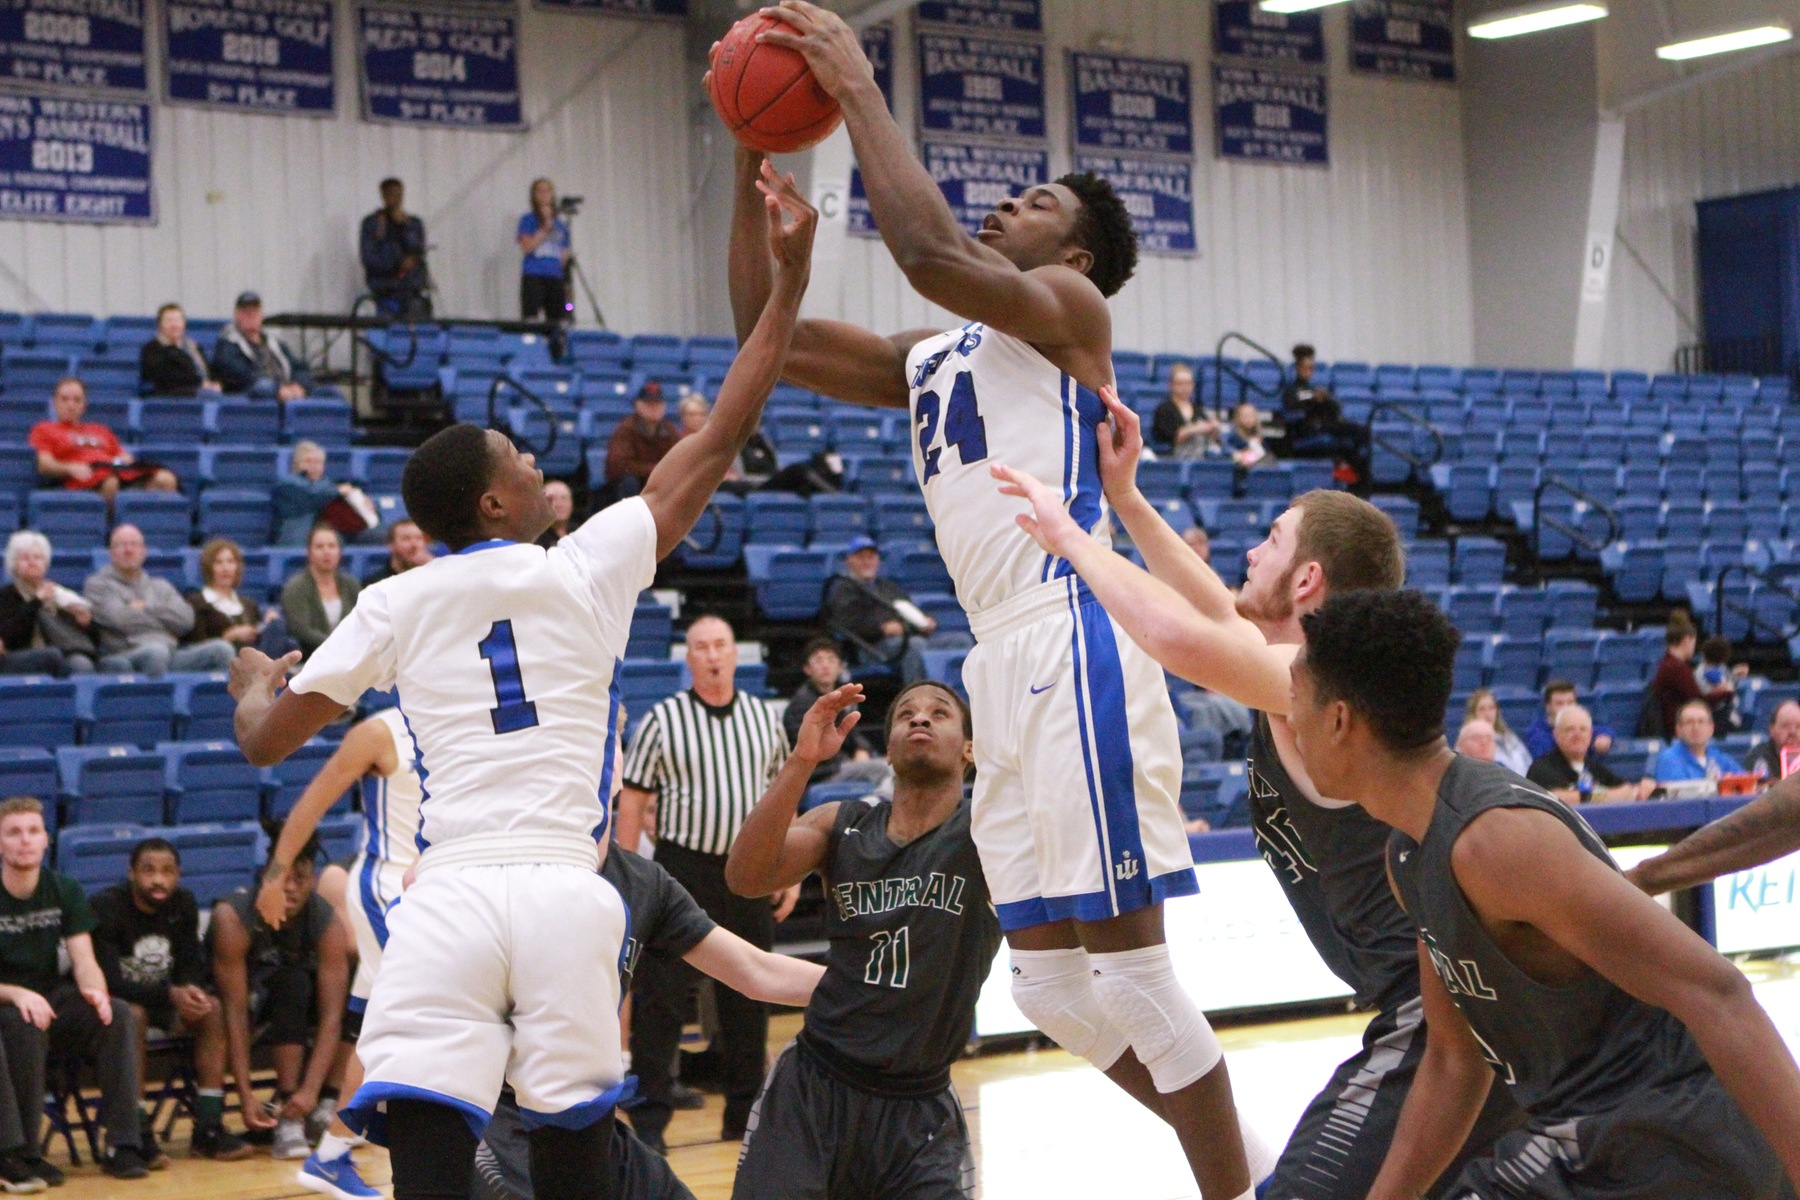 Emmanuel Ugboh secured several rebounds as the Reivers limited the Vikings of Missouri Valley to one shot possessions all evening long in route to their 73-48 victory at the Roadrunner Tip-Off Classic